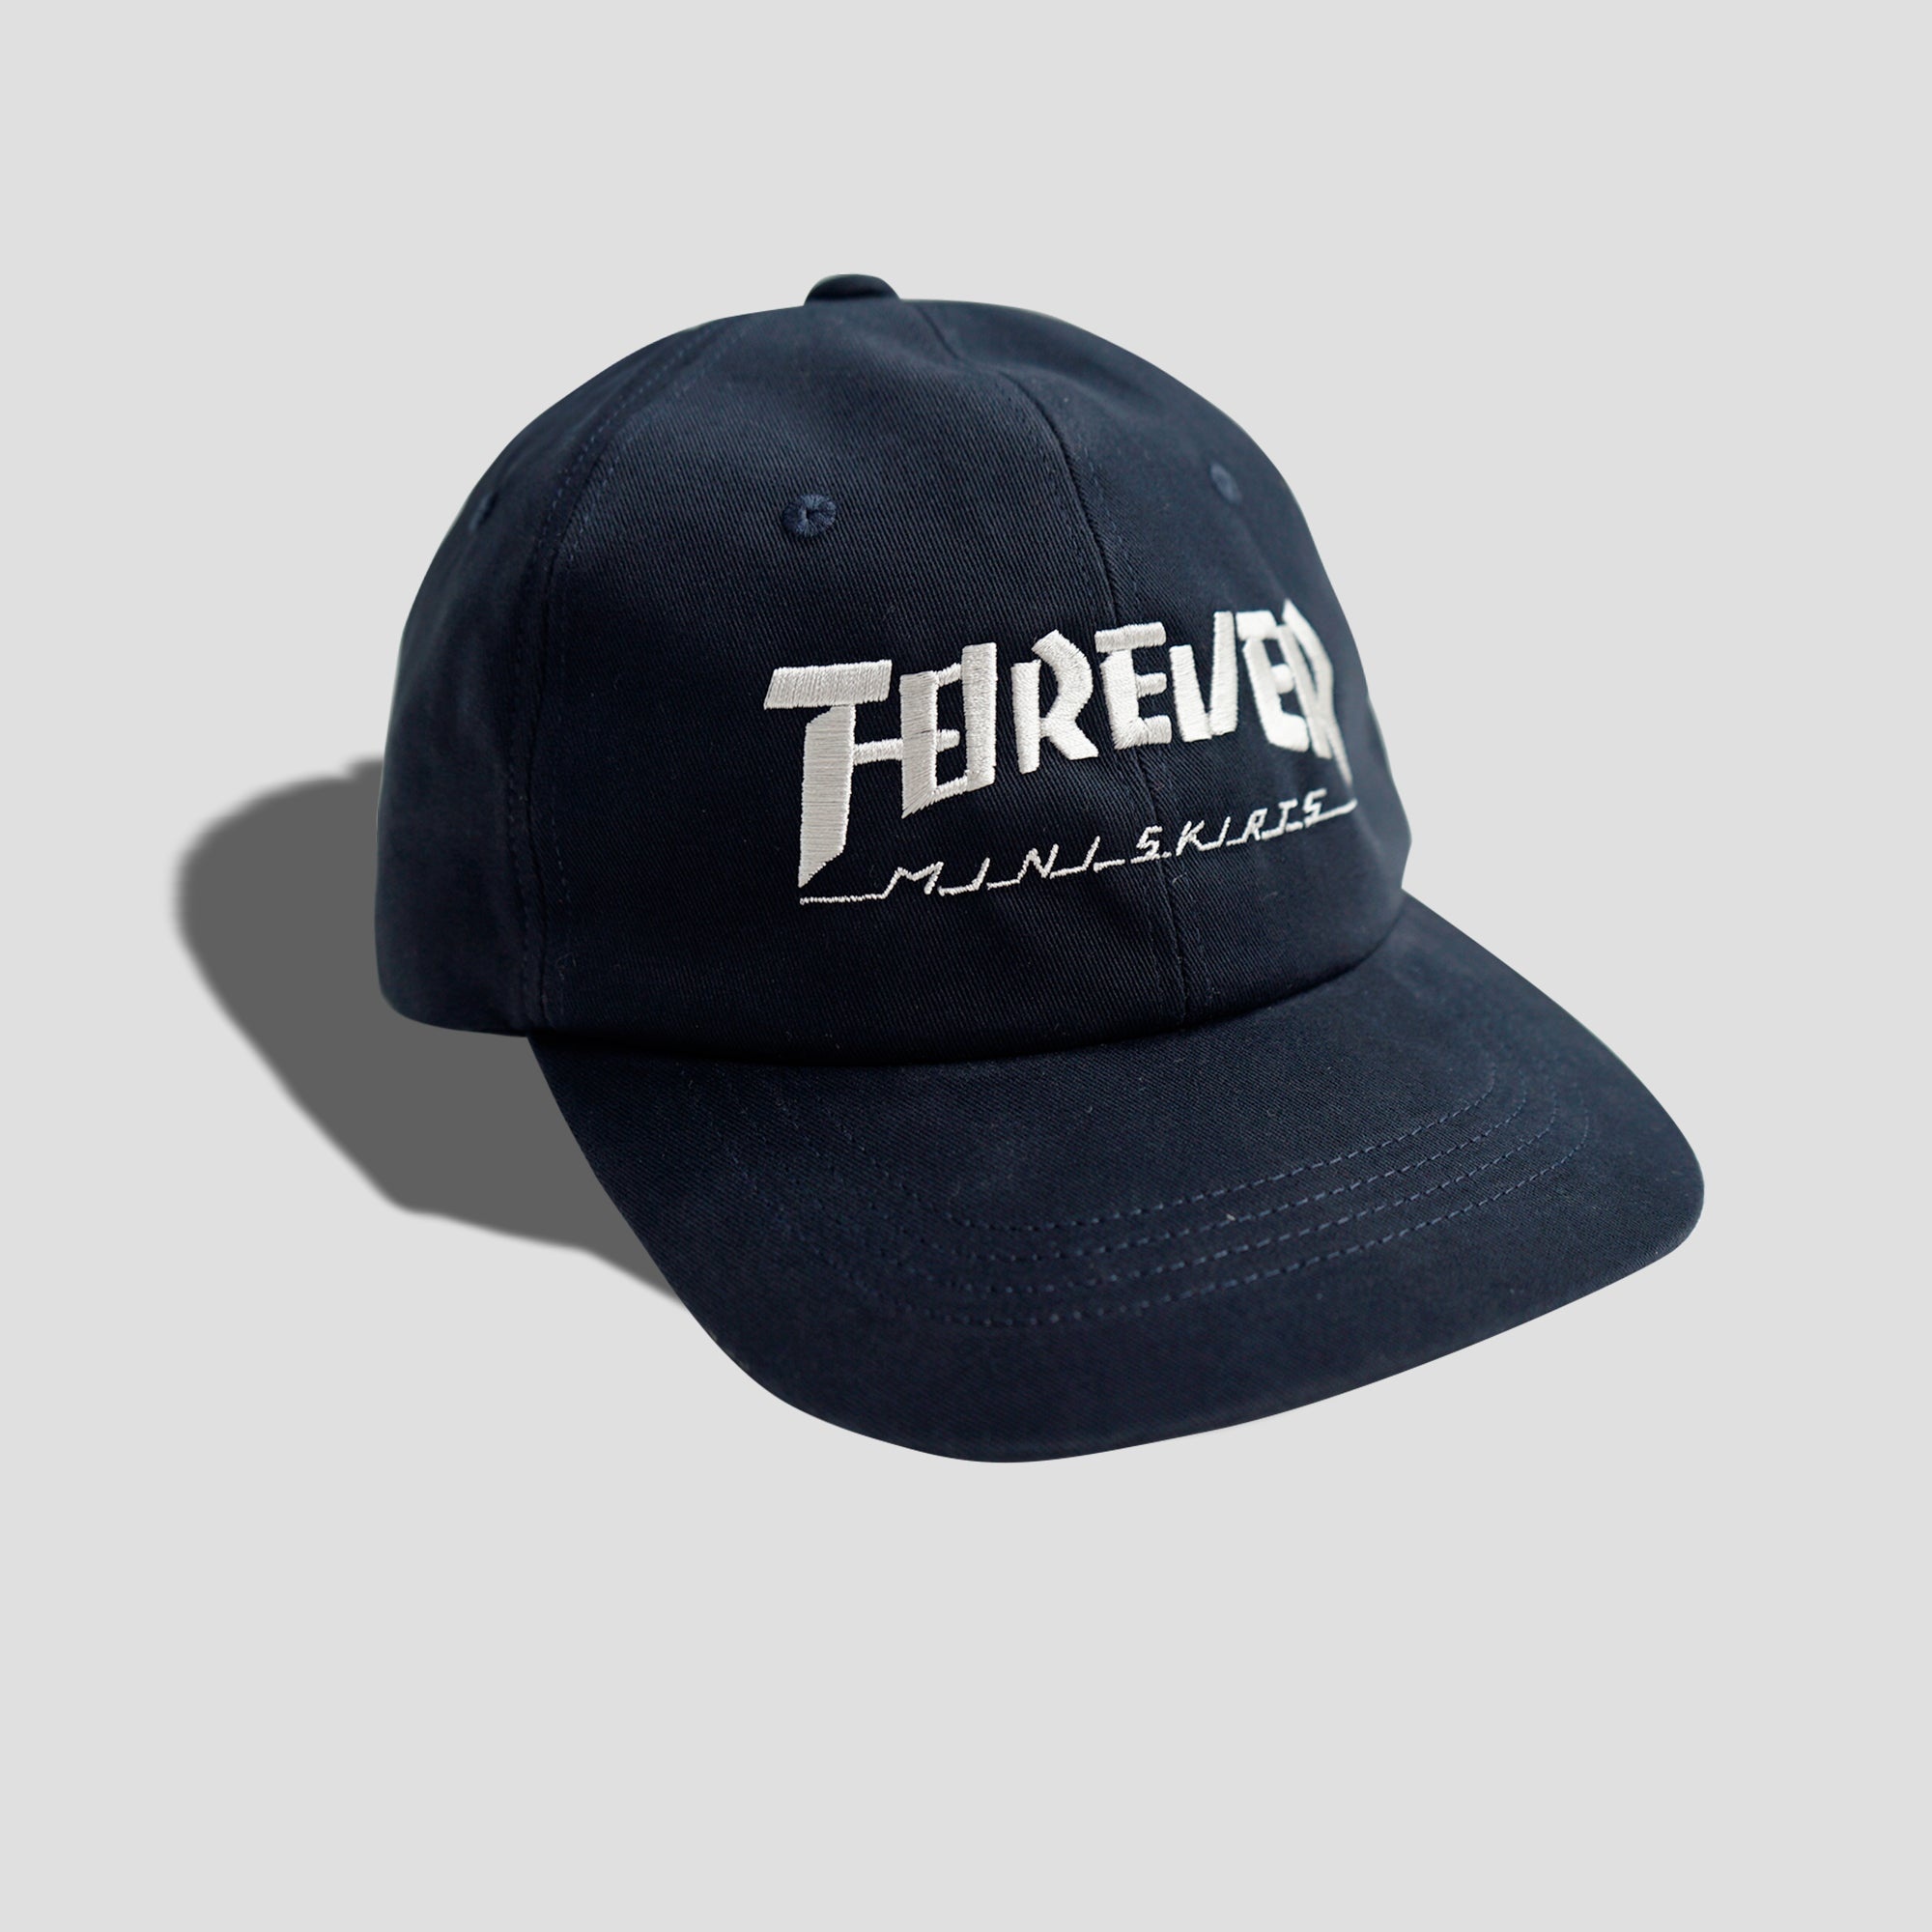 BRUSHED TWILL 6PANNEL SNAP BACK CAPS - 1